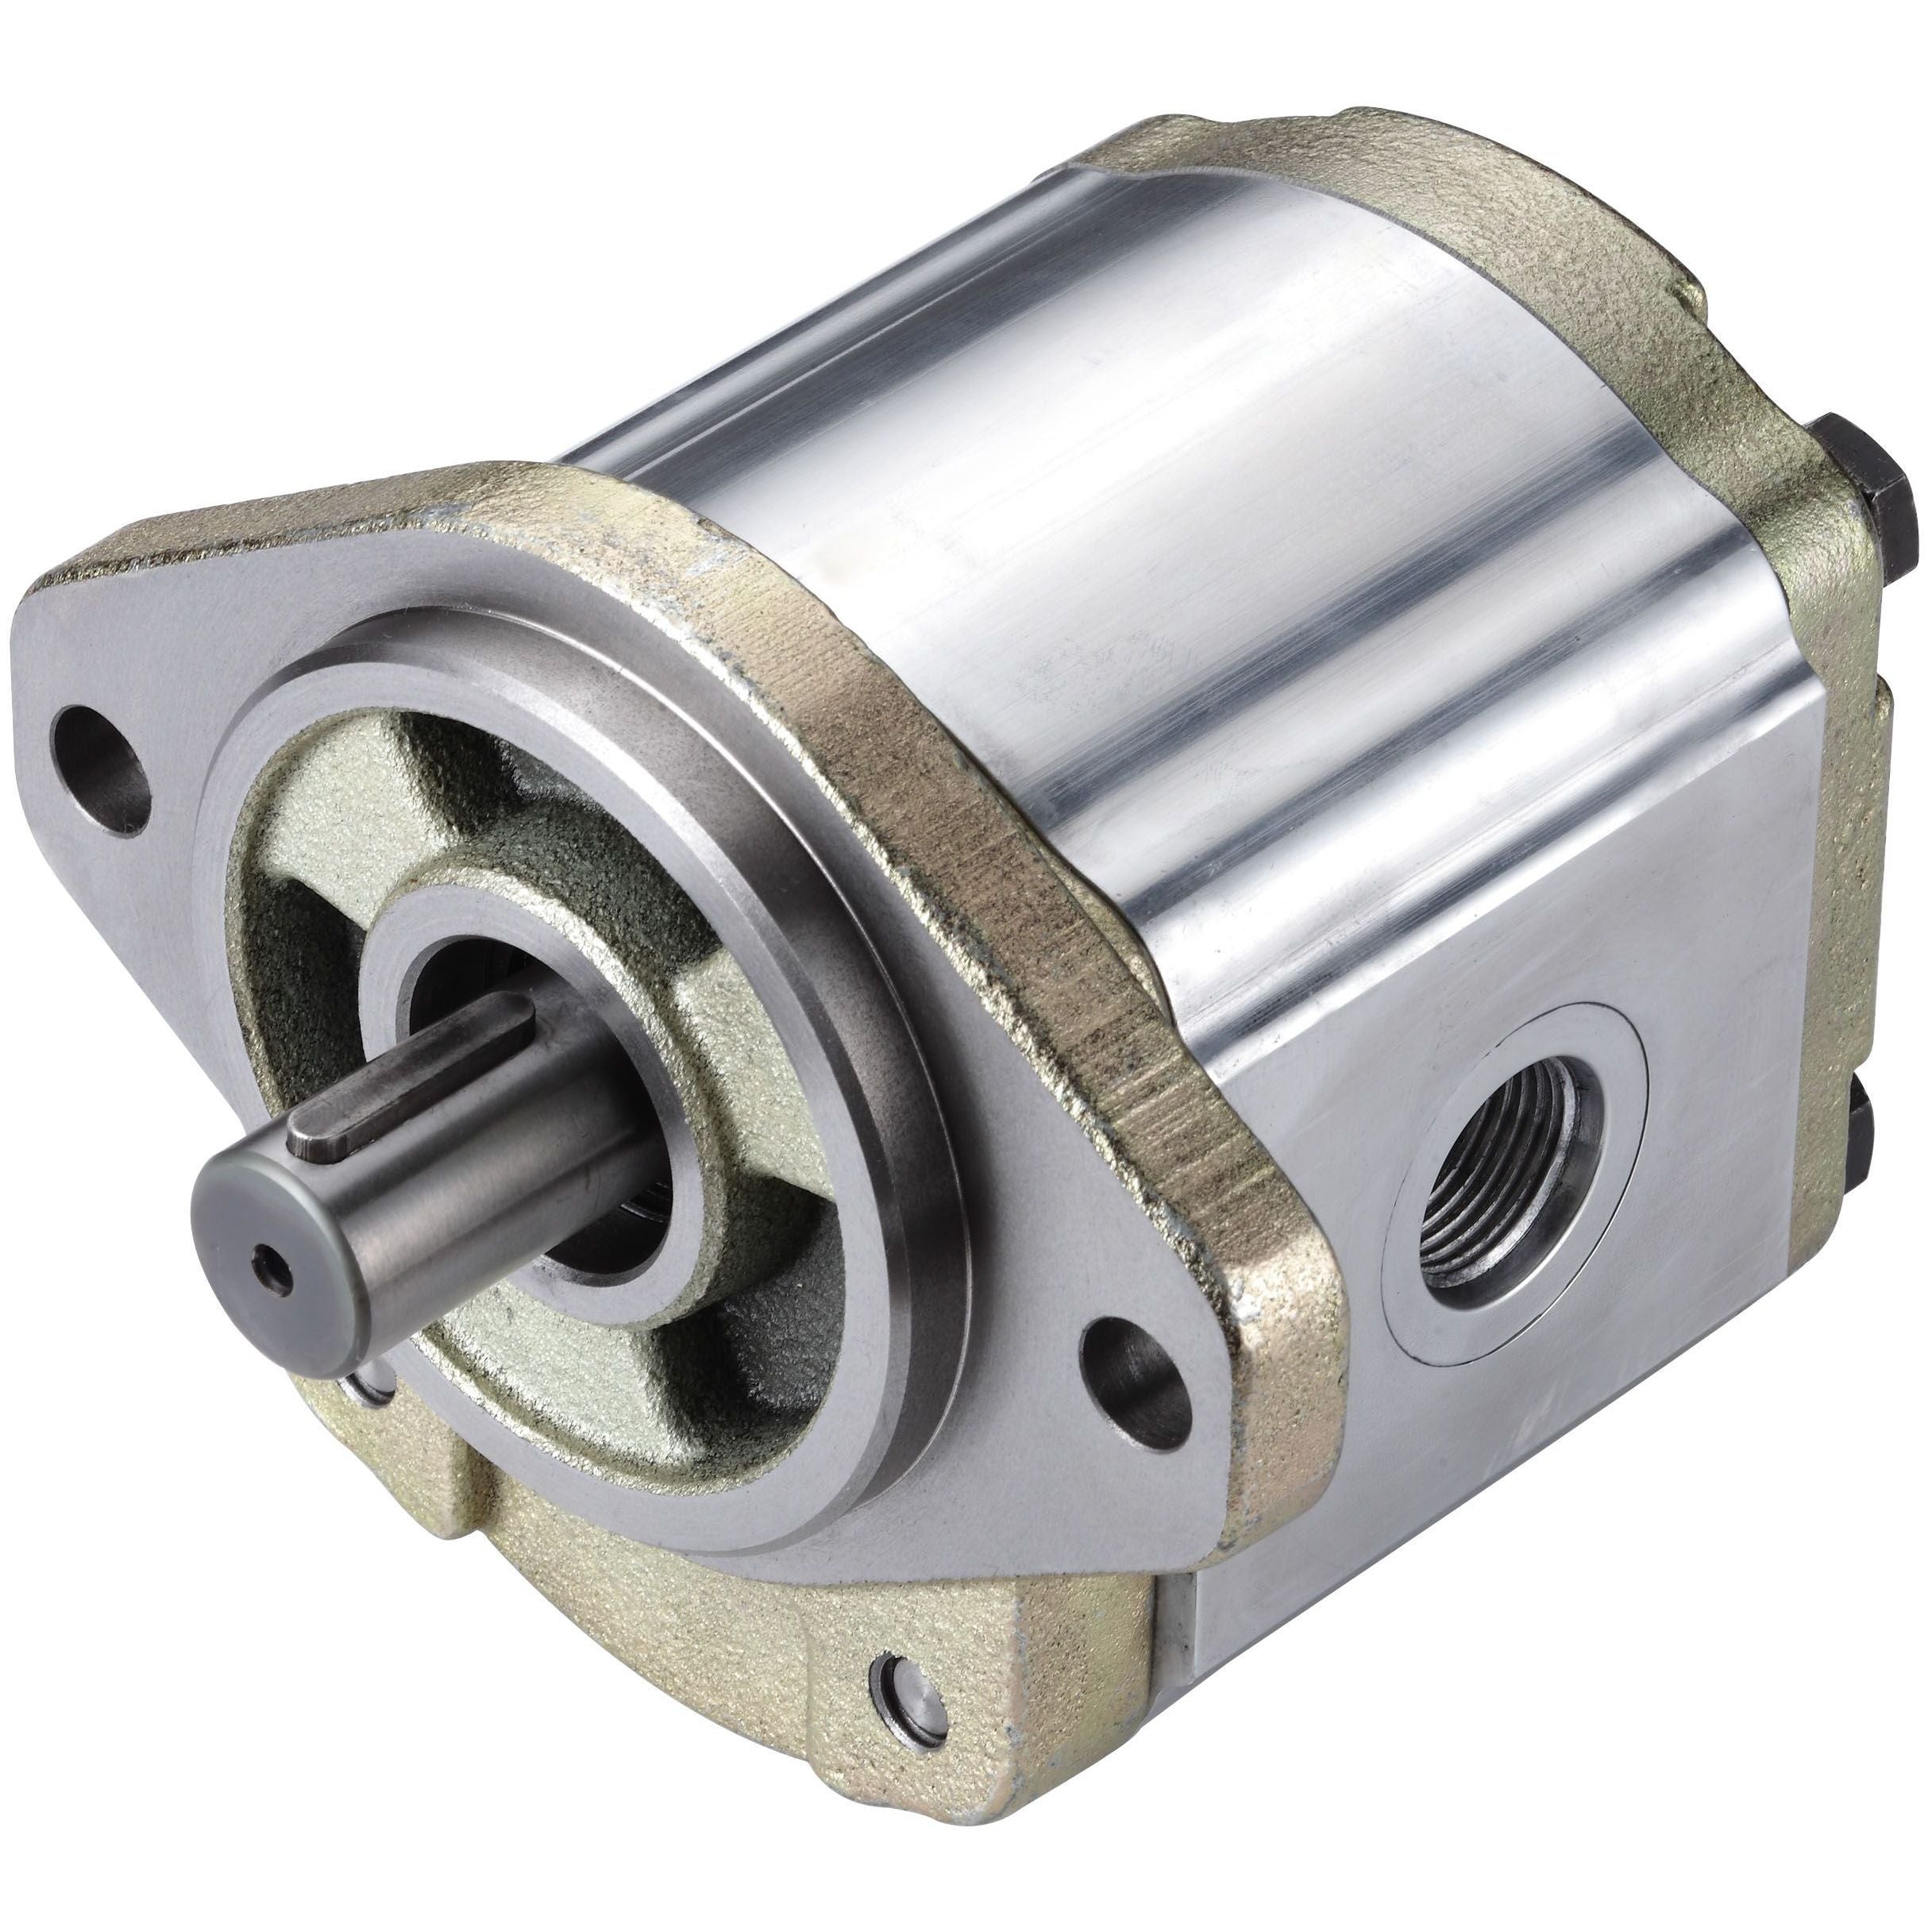 3GB8U144R : Honor Gear Pump, CW Rotation, 44cc (2.69in3), 20.92 GPM, 3100psi, 2500 RPM, #16 SAE (1") In, #16 SAE (1") Out, Splined Shaft 13-Tooth, 16/32 Pitch, SAE B 2-Bolt Mount